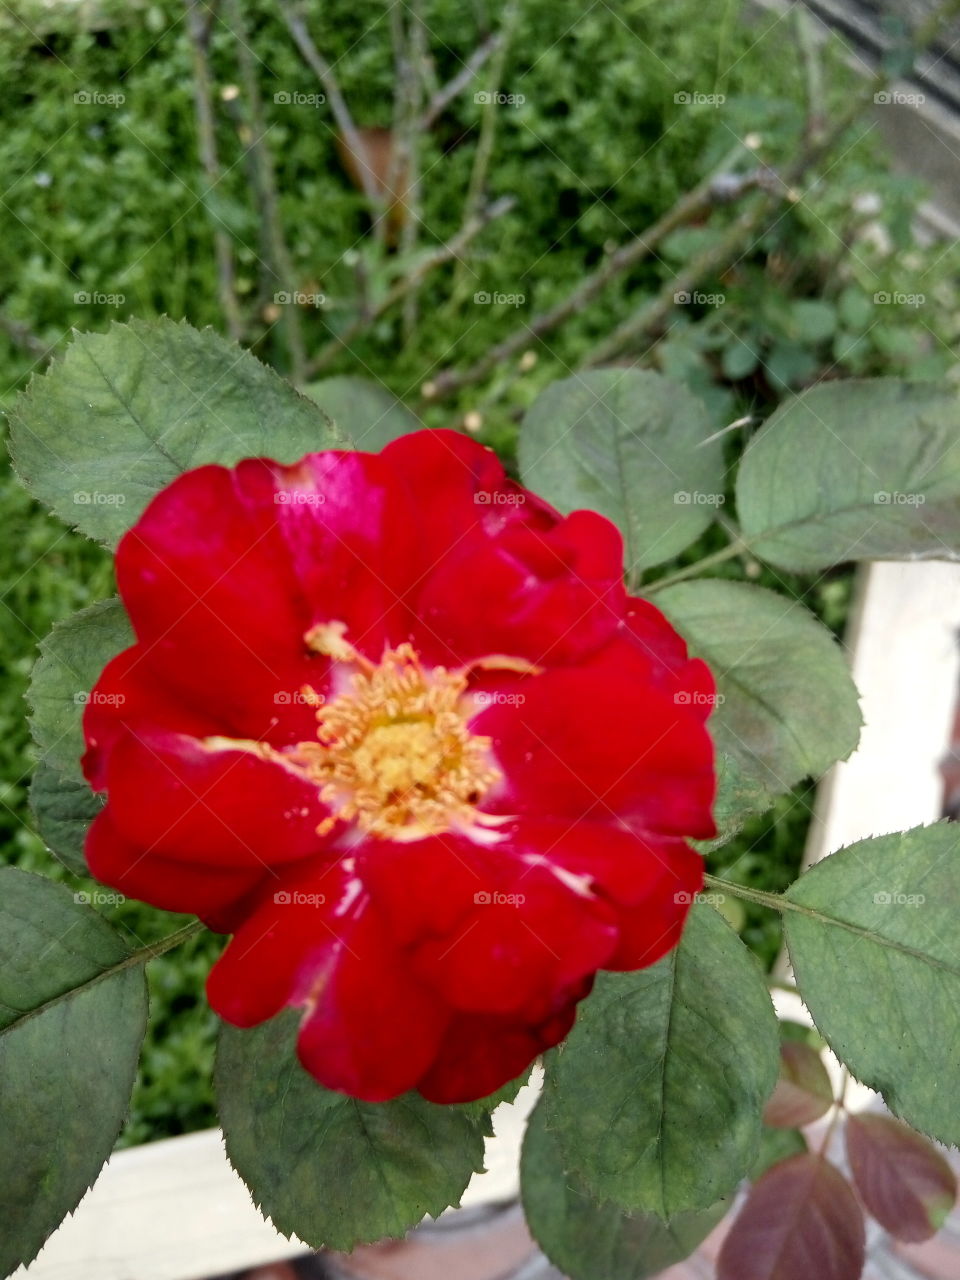 focused on beauty of nature in the center of this picture! red flower!!